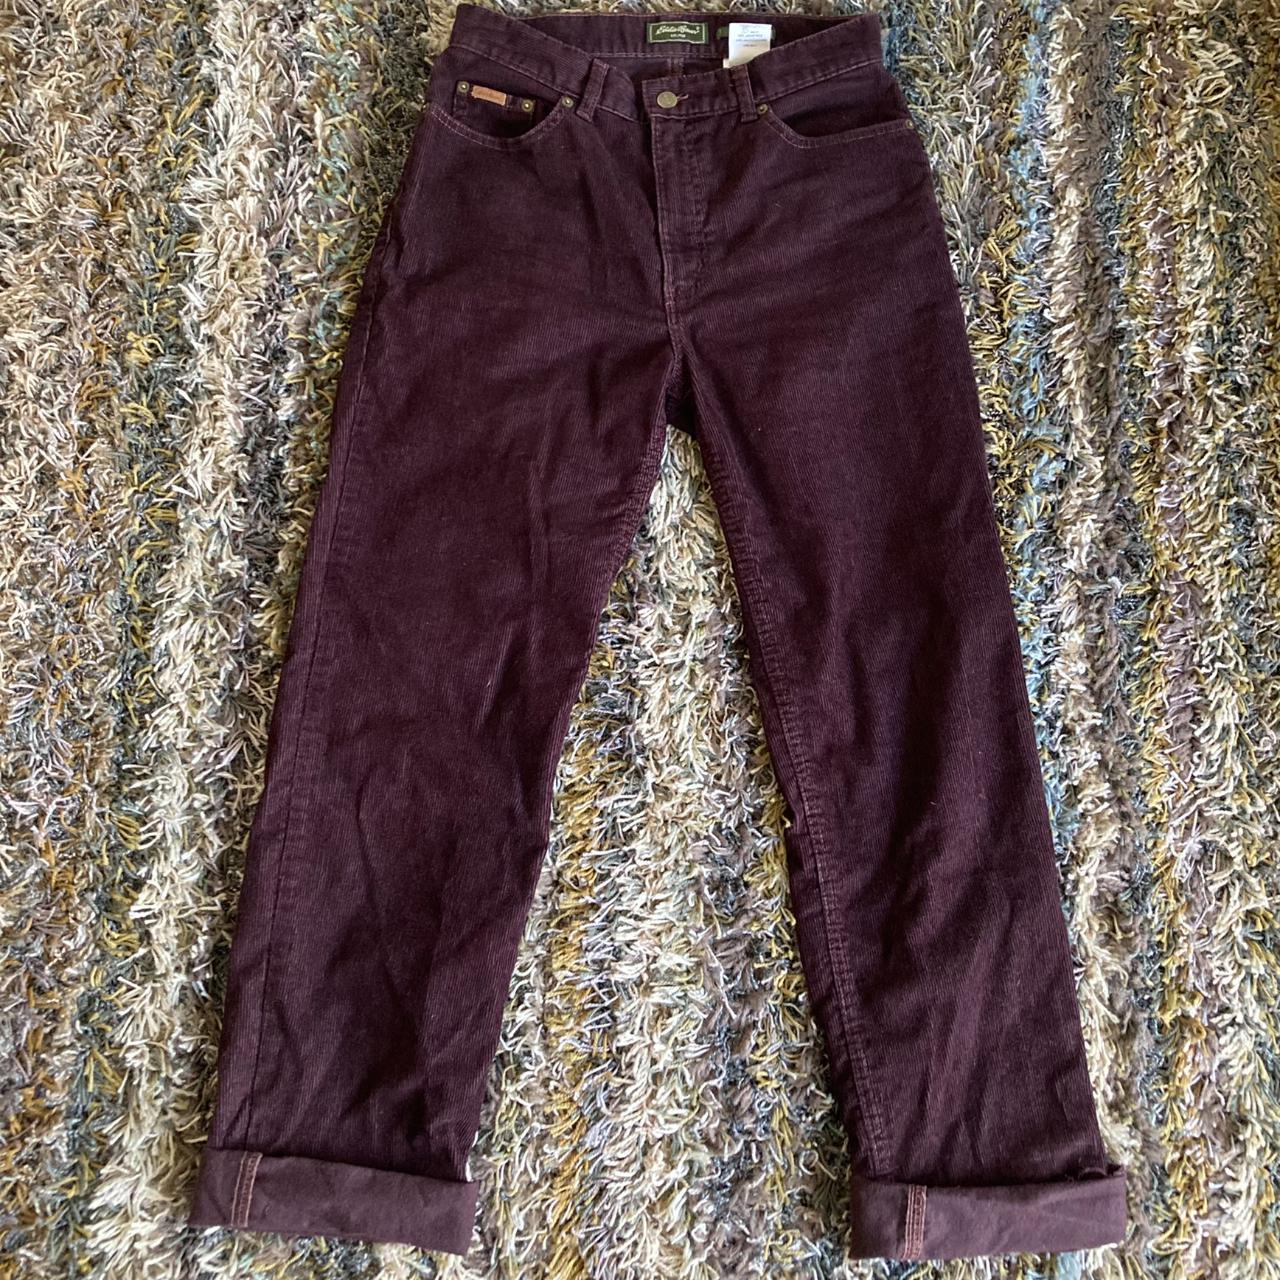 Eddie Bauer Women's Brown and Burgundy Trousers